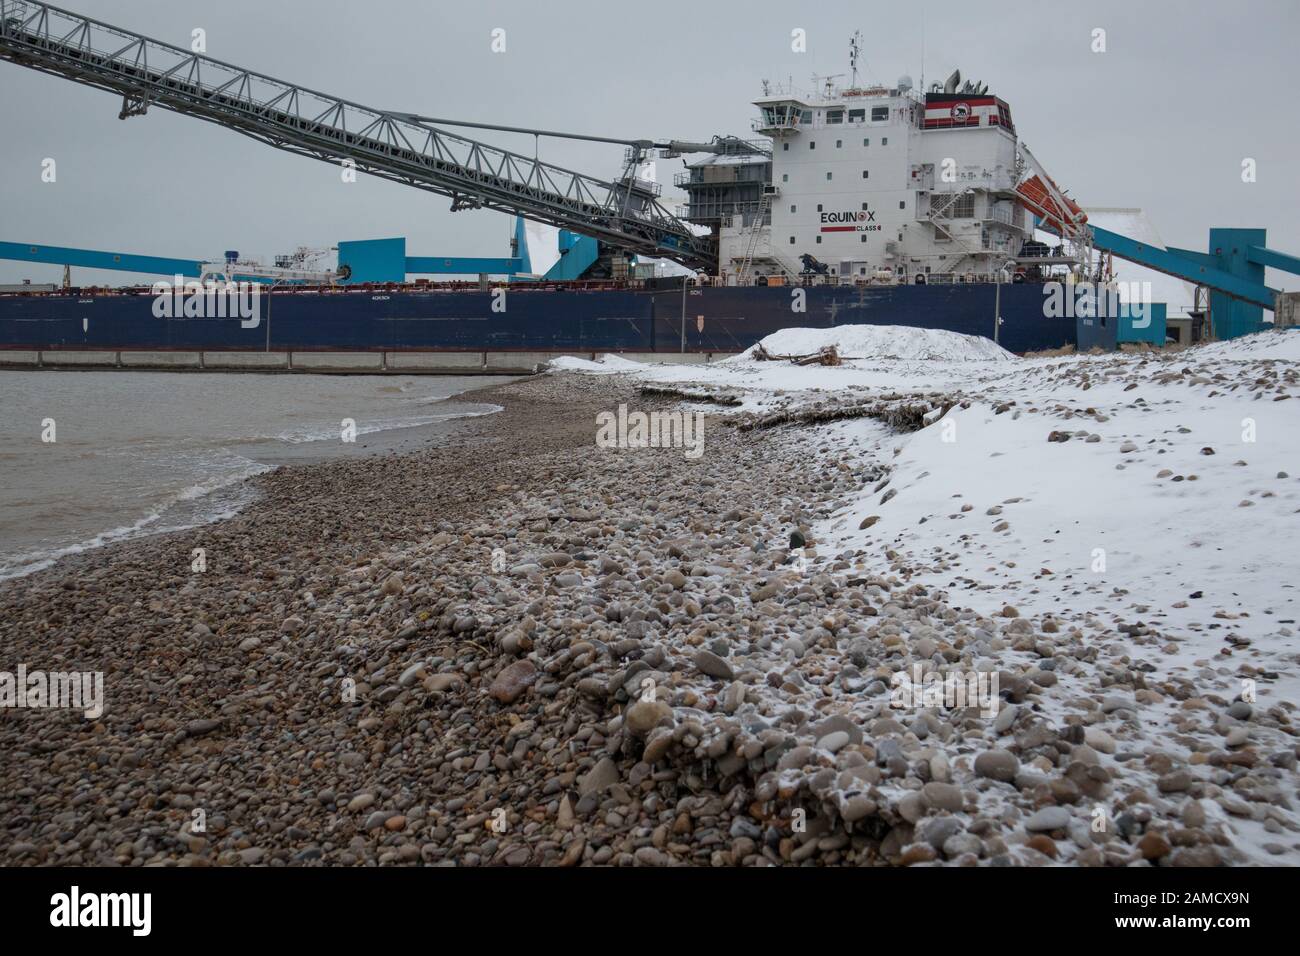 A view of the rocky and snowy beach of Goderich as well as part of a huge boat moored at the port loading and unloading facilities. Stock Photo